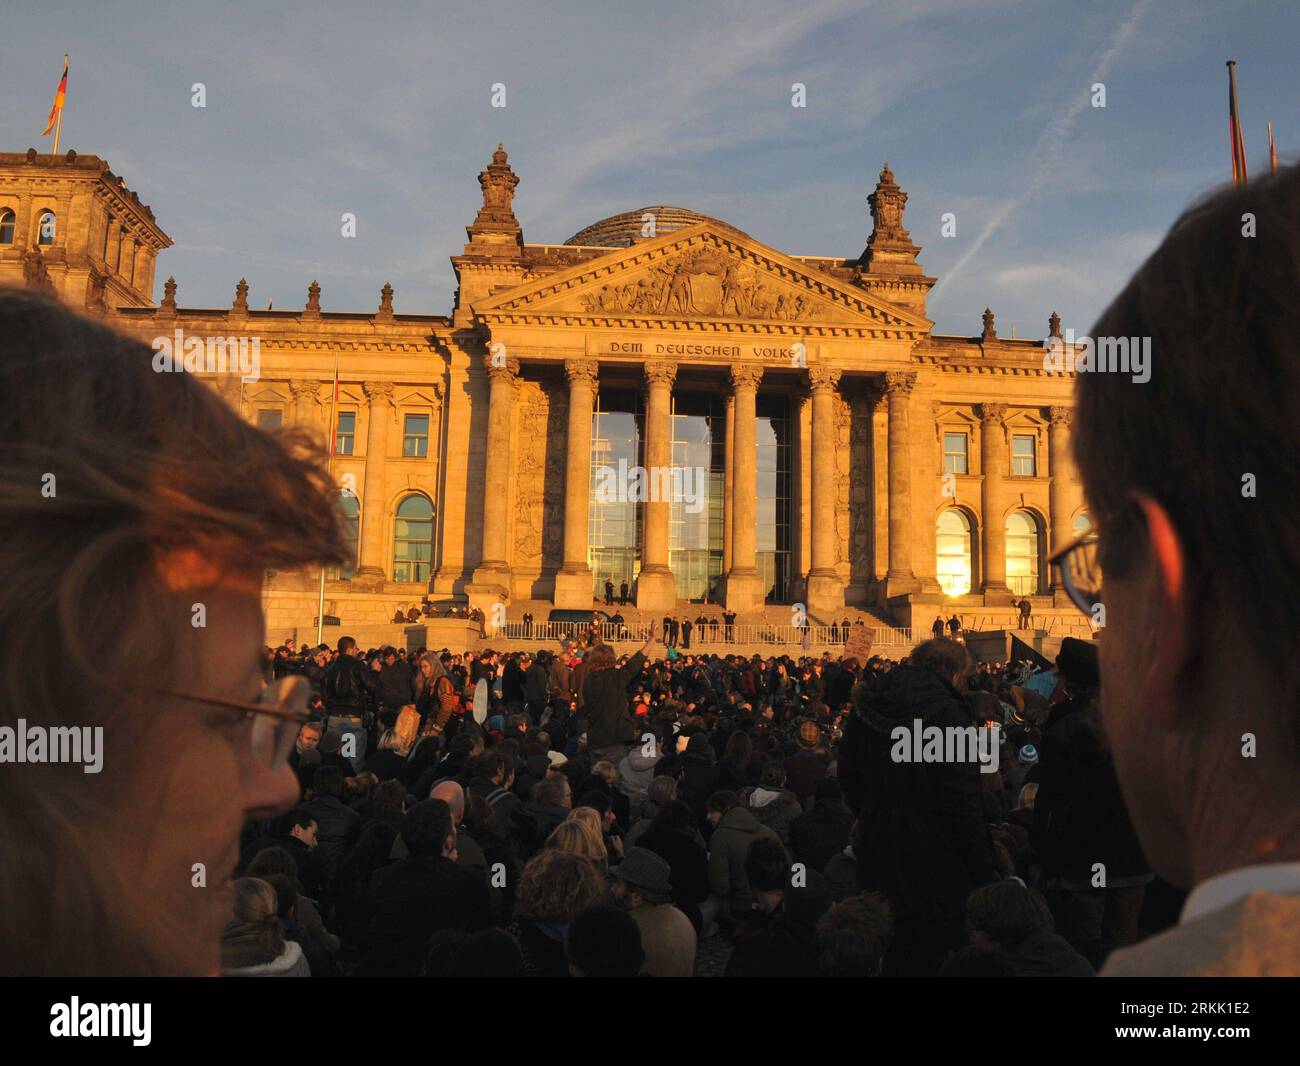 Bildnummer: 56184159  Datum: 15.10.2011  Copyright: imago/Xinhua (111016) -- BERLIN, Oct. 16, 2011 (Xinhua) -- Protestors gather in front of the Parliament Building in Berlin, capital of Germany, Oct. 15, 2011, in a solidarity with the Occupy  protests which spread to cities in more than 80 countries around the world on Saturday. (Xinhua/Wang Pingping) GERMANY-BERLIN-ECONOMIC-PROTEST PUBLICATIONxNOTxINxCHN Gesellschaft Politik Wirtschaft Protest Demo Finanzkrise Finanzwirtschaft Wirtschaftskrise Krise Banken xbs x0x 2011 quer premiumd  o0 Wirtschaft Banken Bankenprotest Anti Kapitalismus Antik Stock Photo